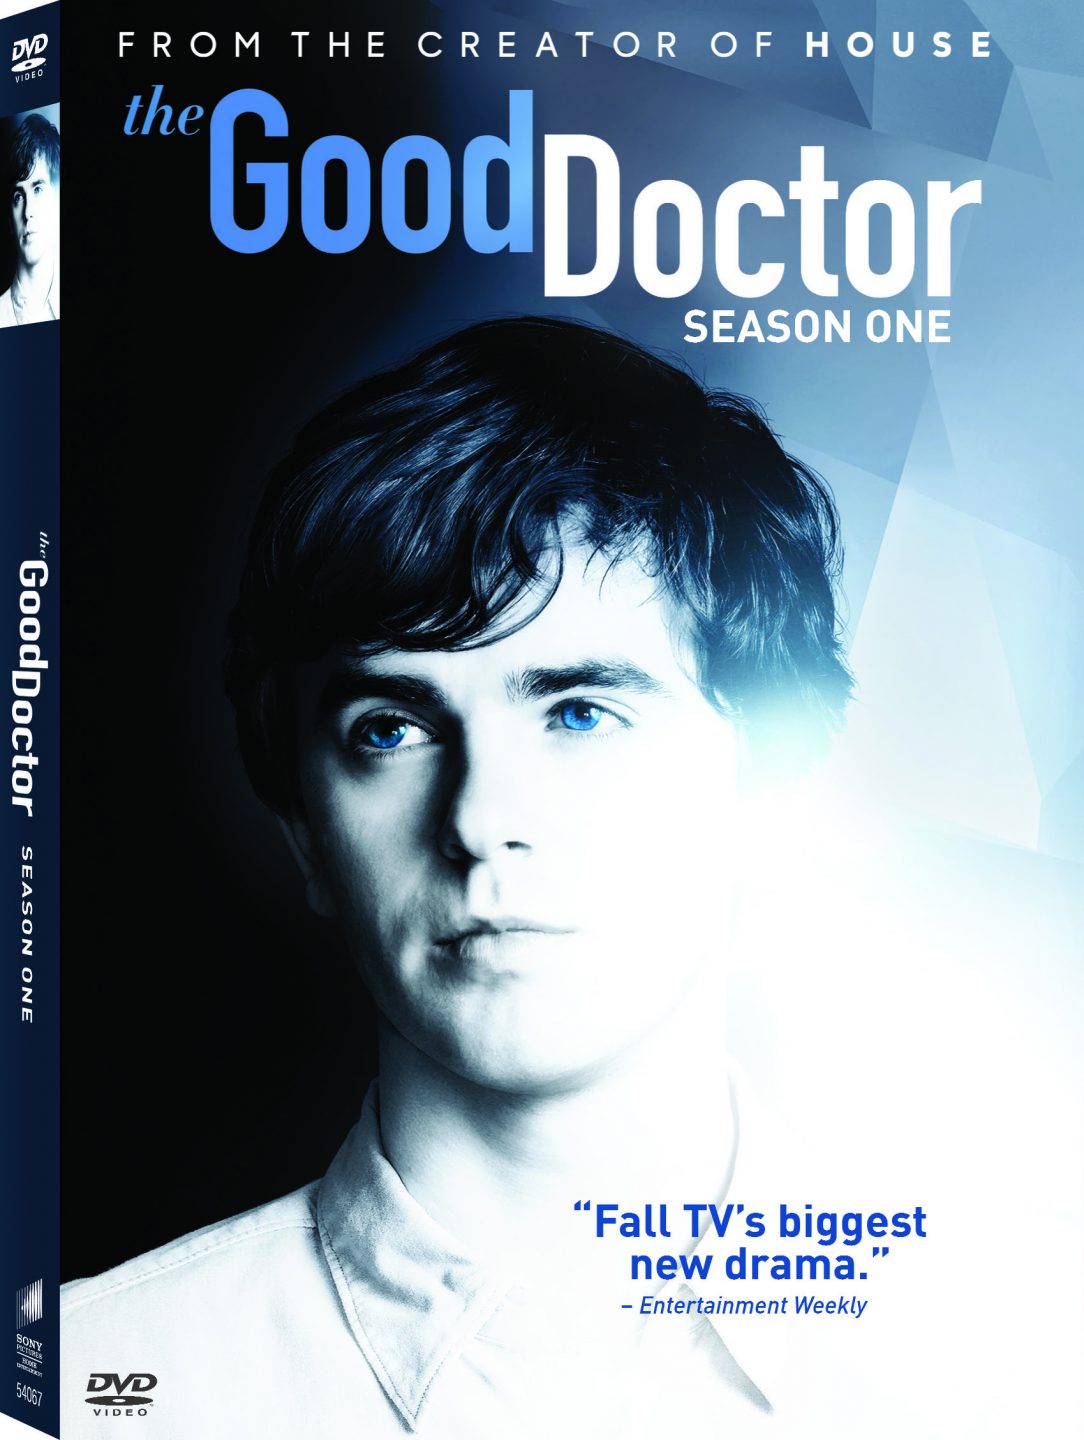 The Good Doctor: Season One DVD cover (Sony Pictures Home Entertainment)